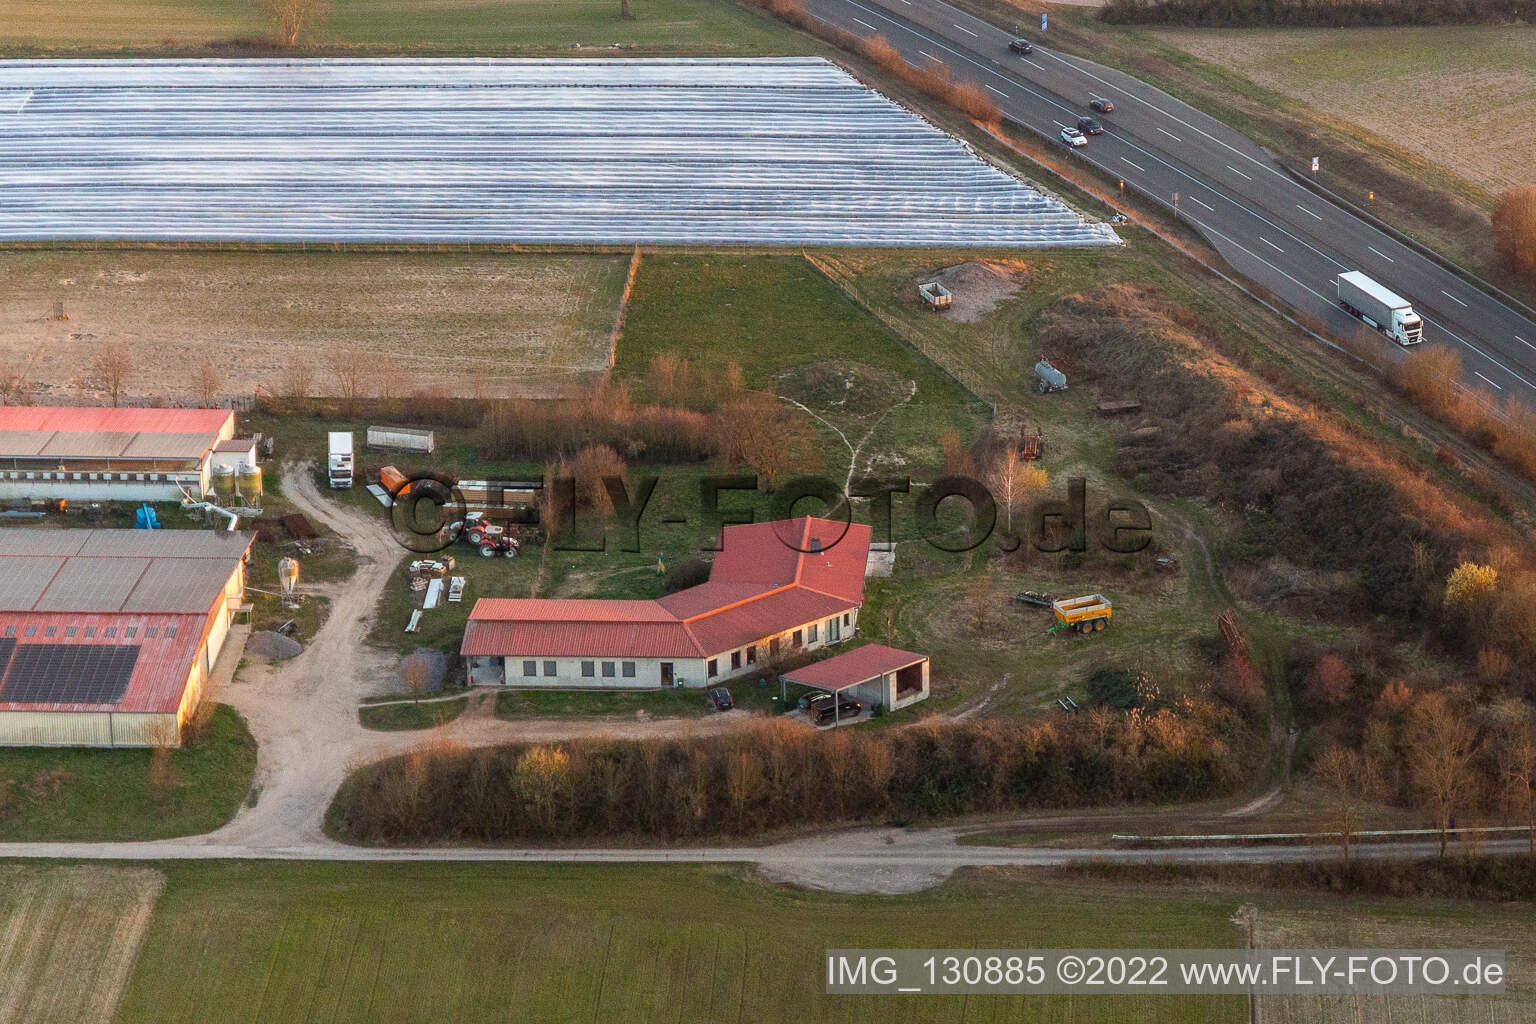 Oblique view of Chicken farm - egg farm in Erlenbach bei Kandel in the state Rhineland-Palatinate, Germany